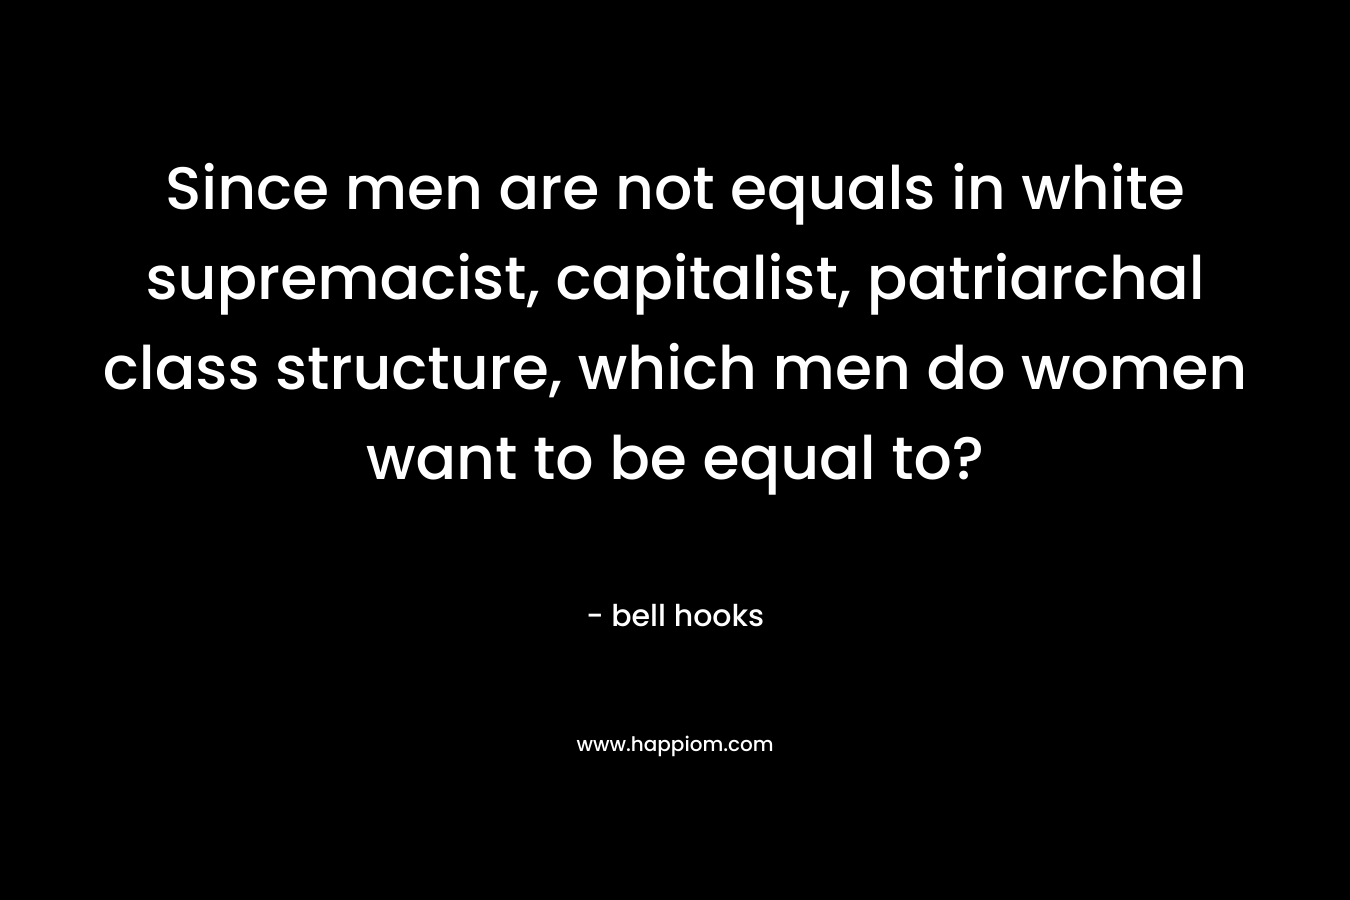 Since men are not equals in white supremacist, capitalist, patriarchal class structure, which men do women want to be equal to? – bell hooks